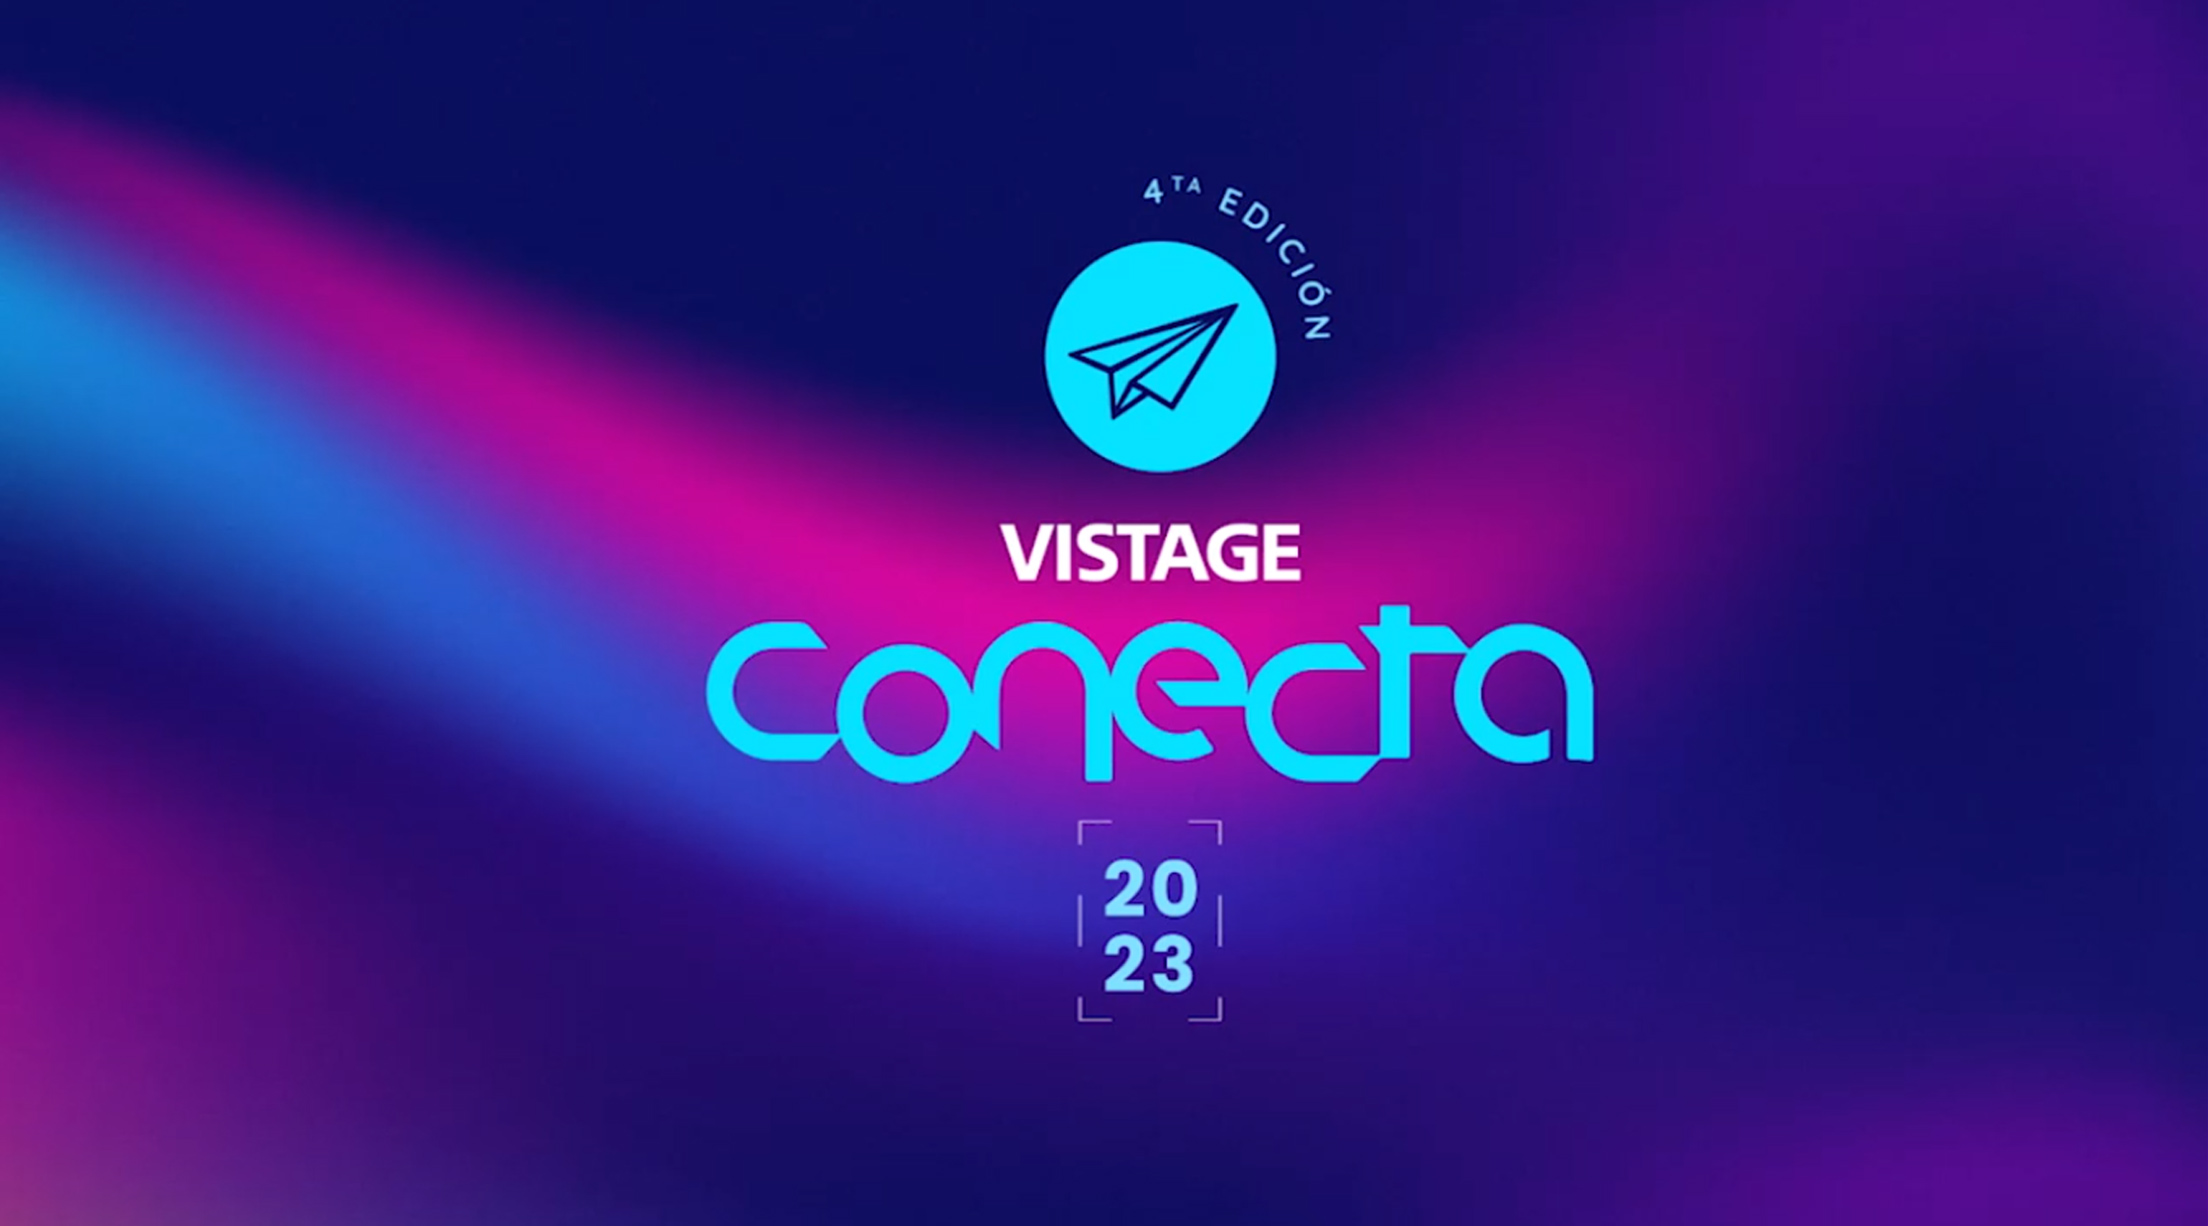 Save the date: Vistage Conecta 2023